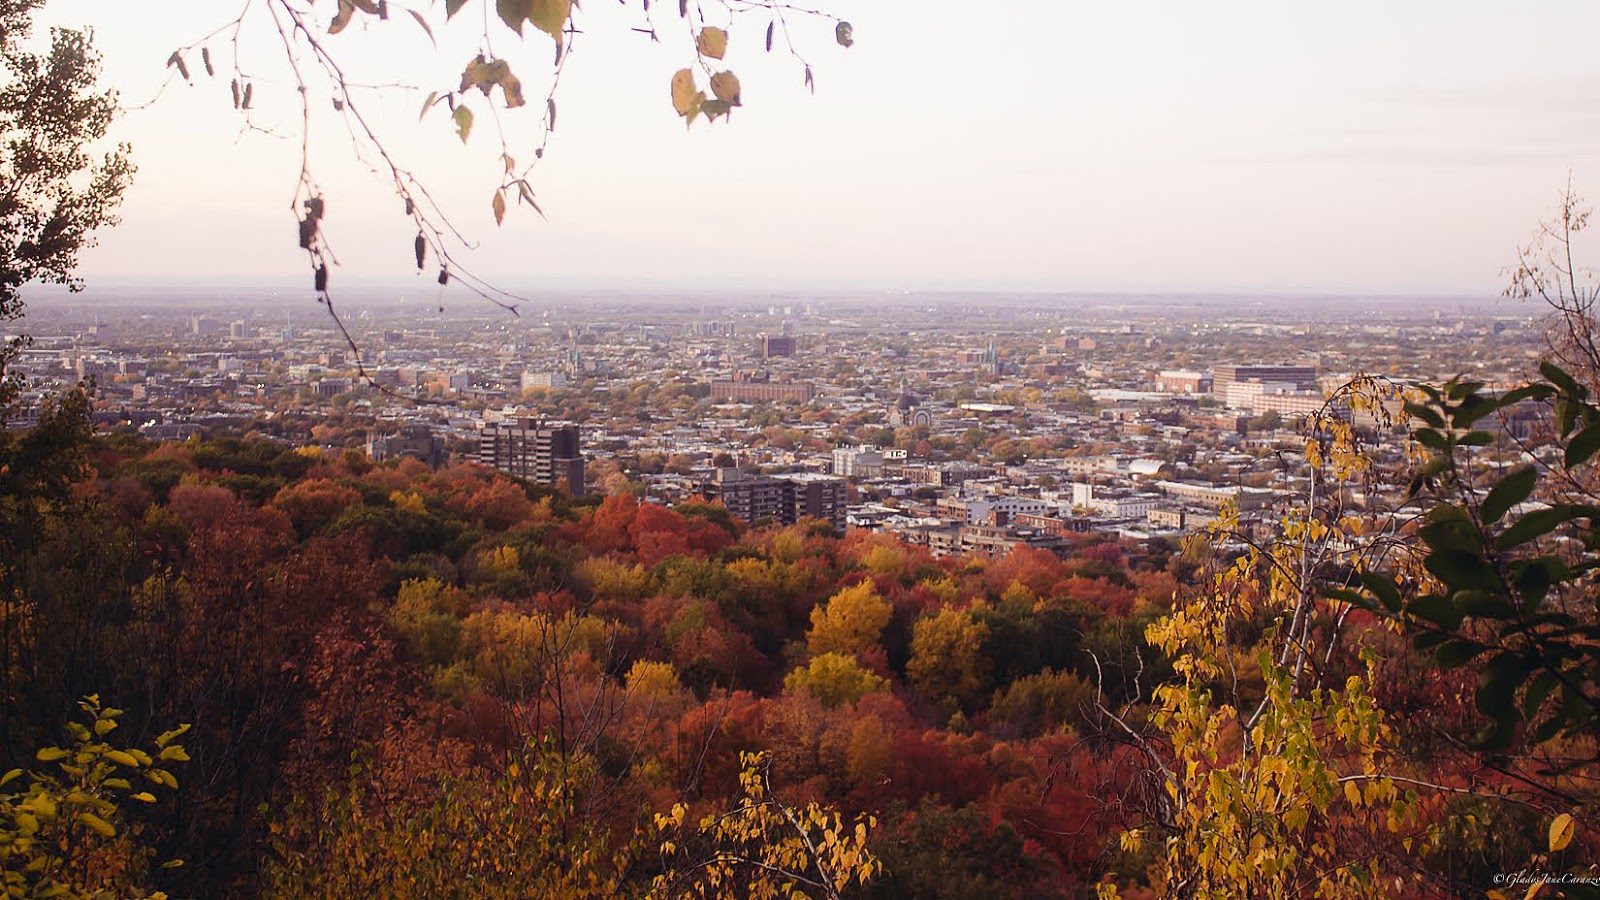 Mount Royal: Things To Do in Montreal, Quebec, Canada